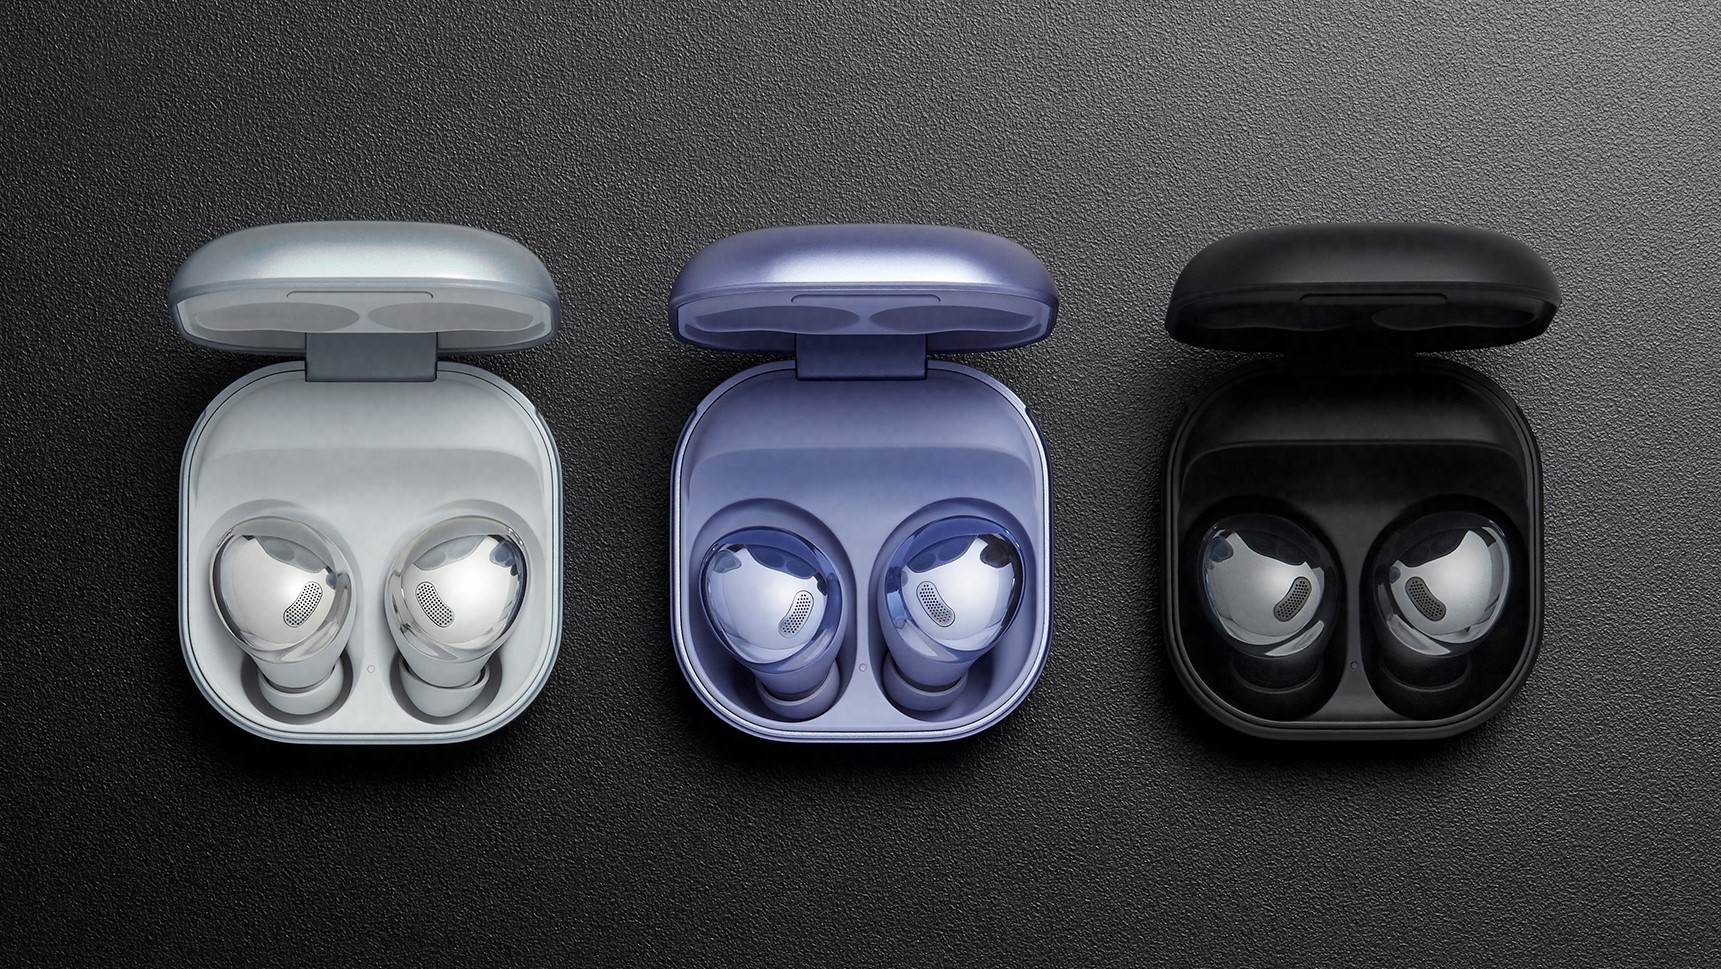 How to use Samsung Galaxy Buds Pro